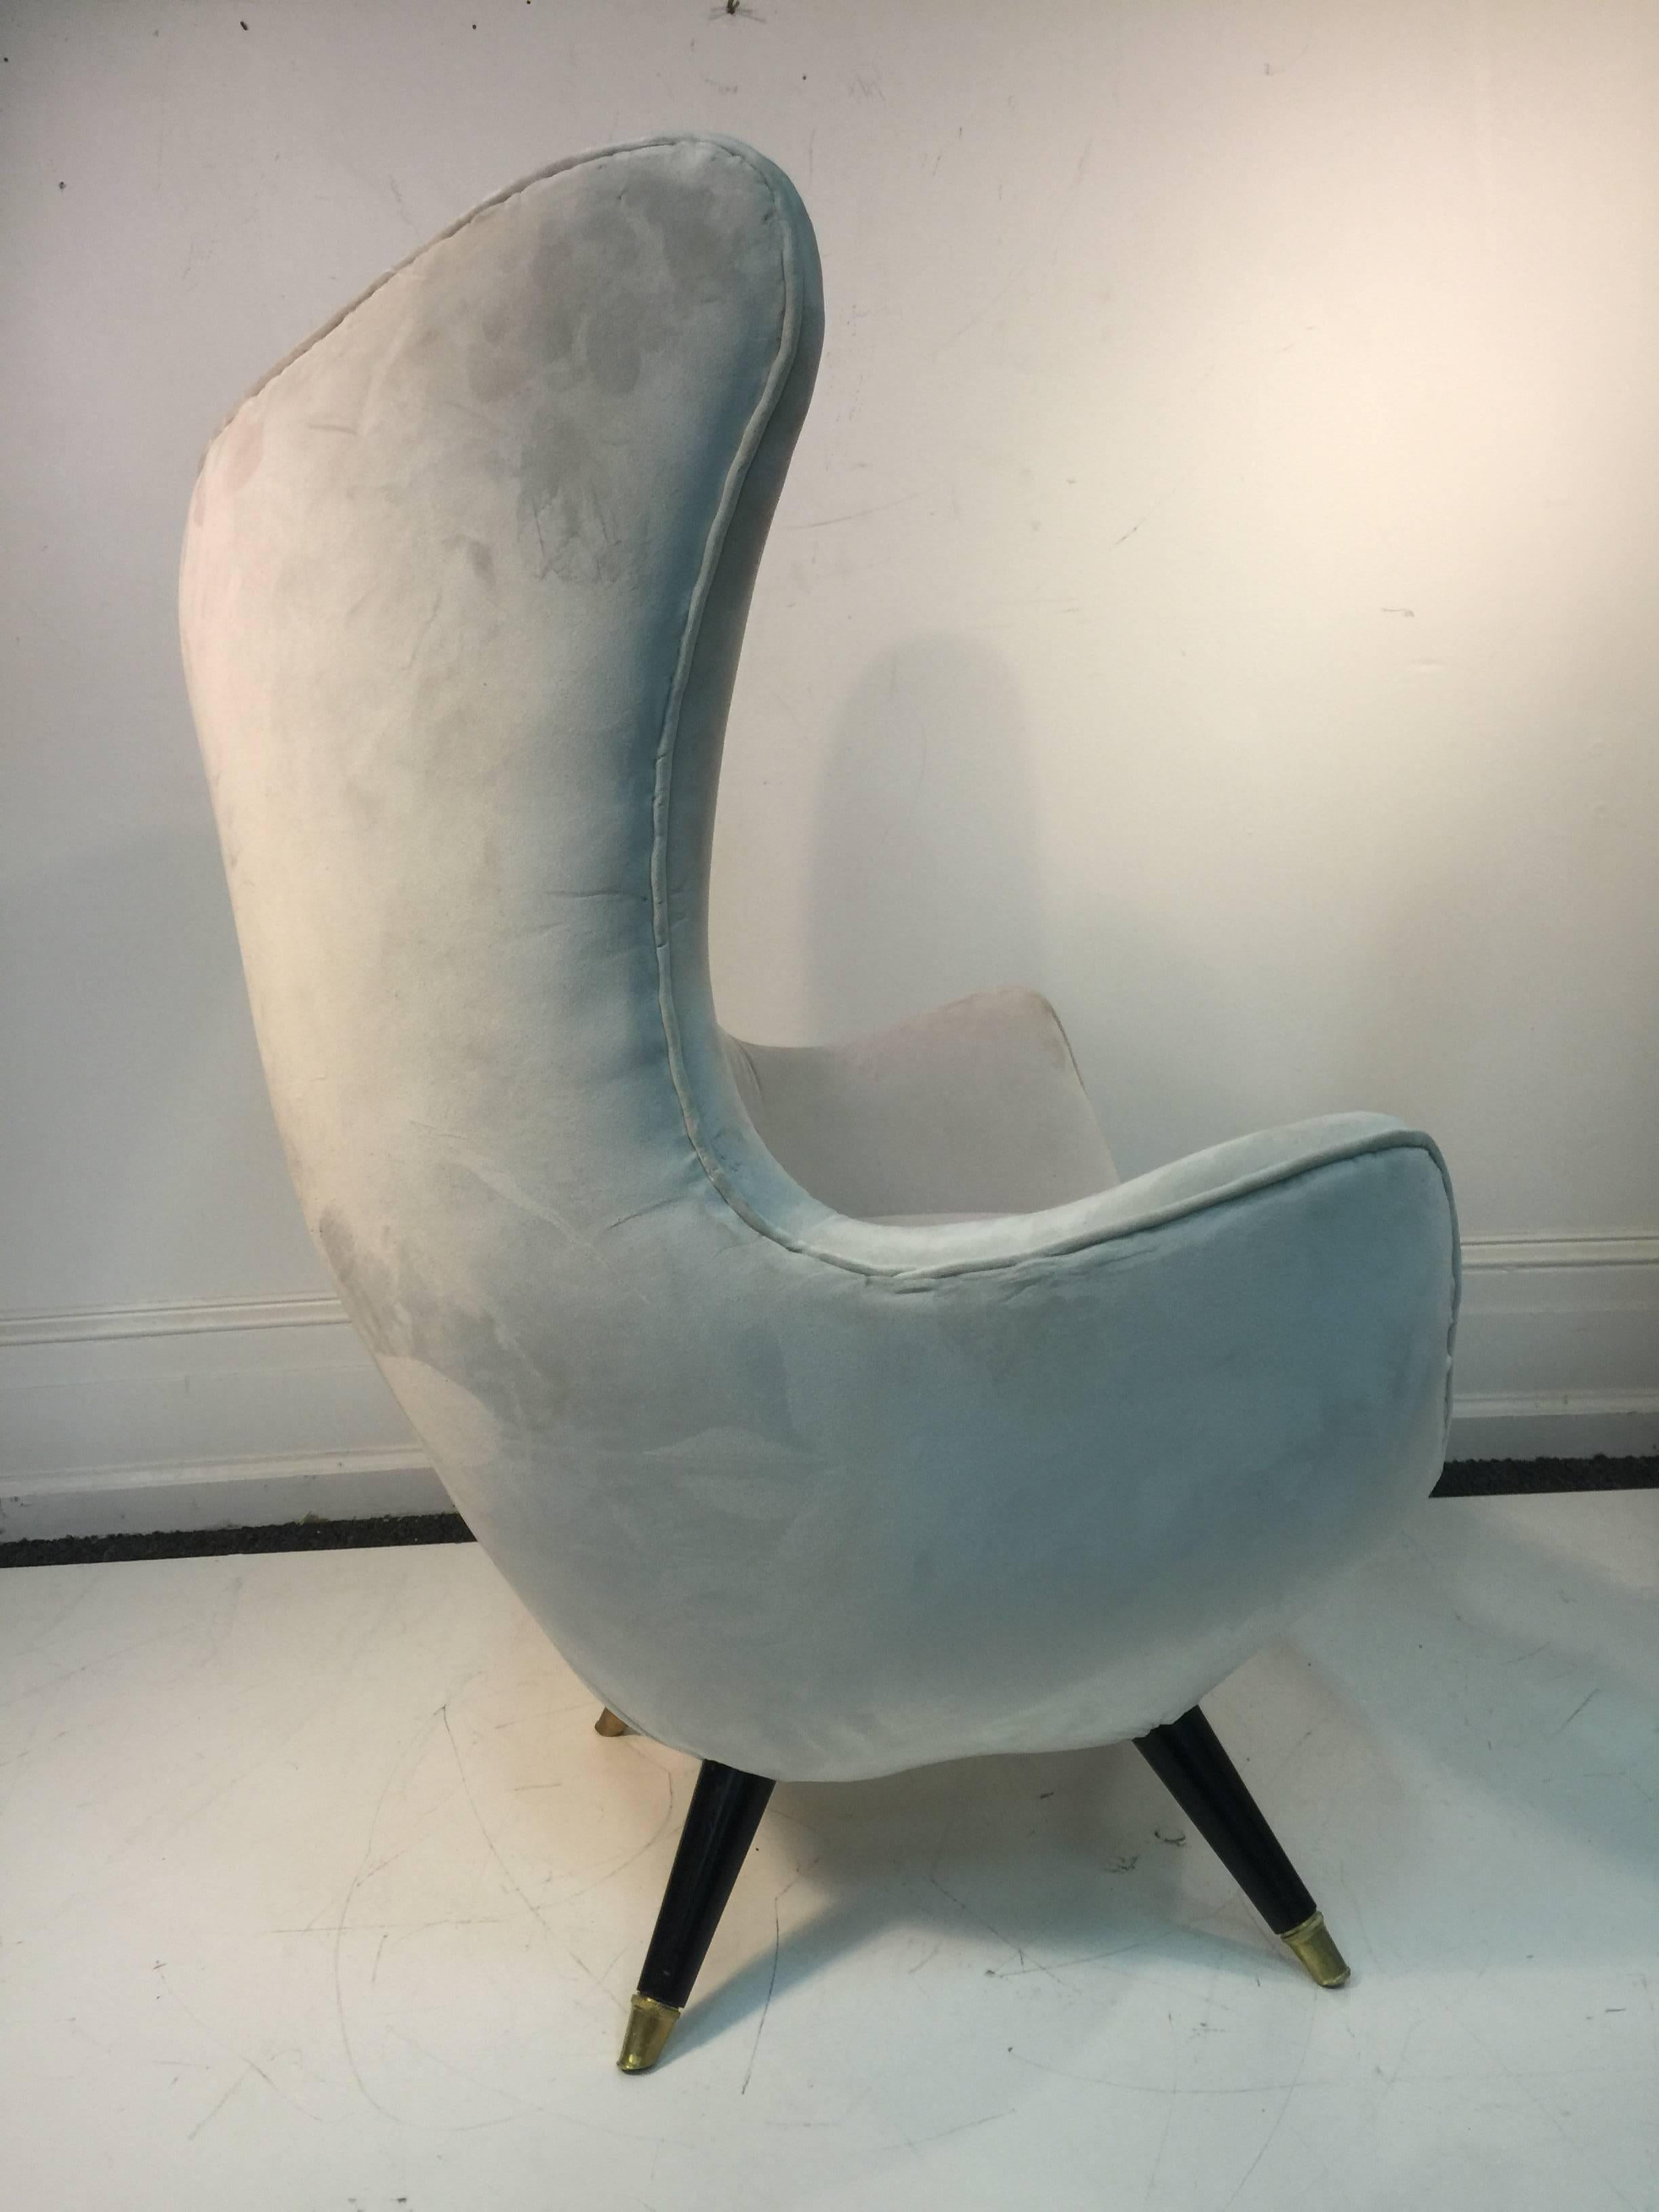 20th Century Stunning Pair of Sculptural Lounge Chairs in the Manner of Carlo Mollino For Sale